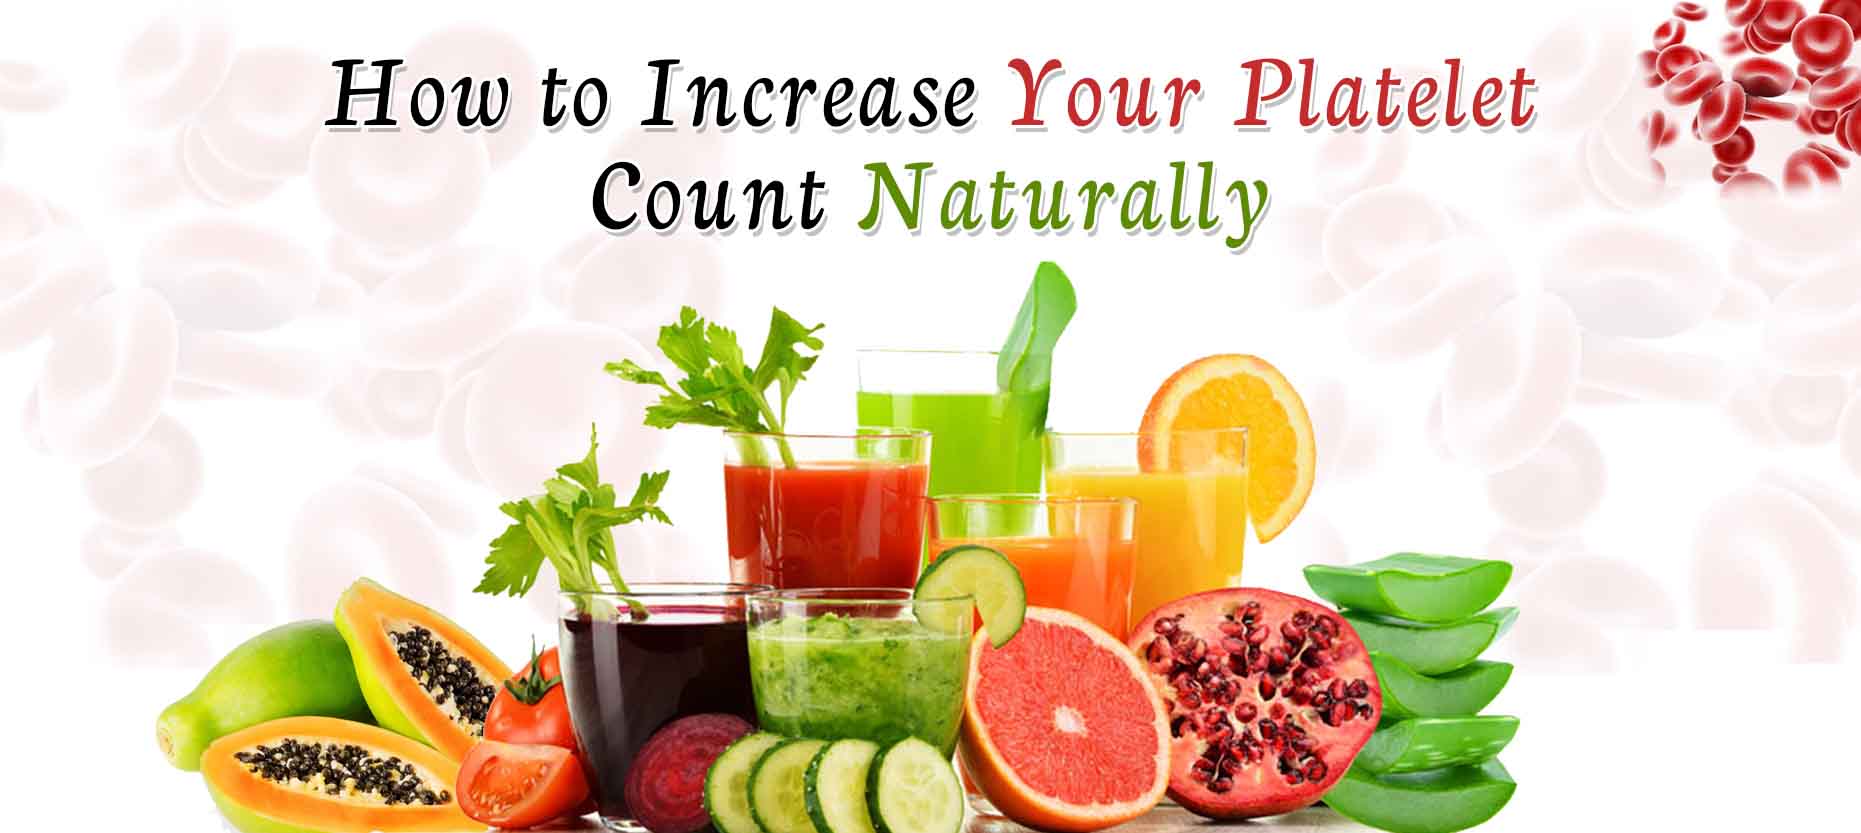 How to Increase your Platelet Count Naturally